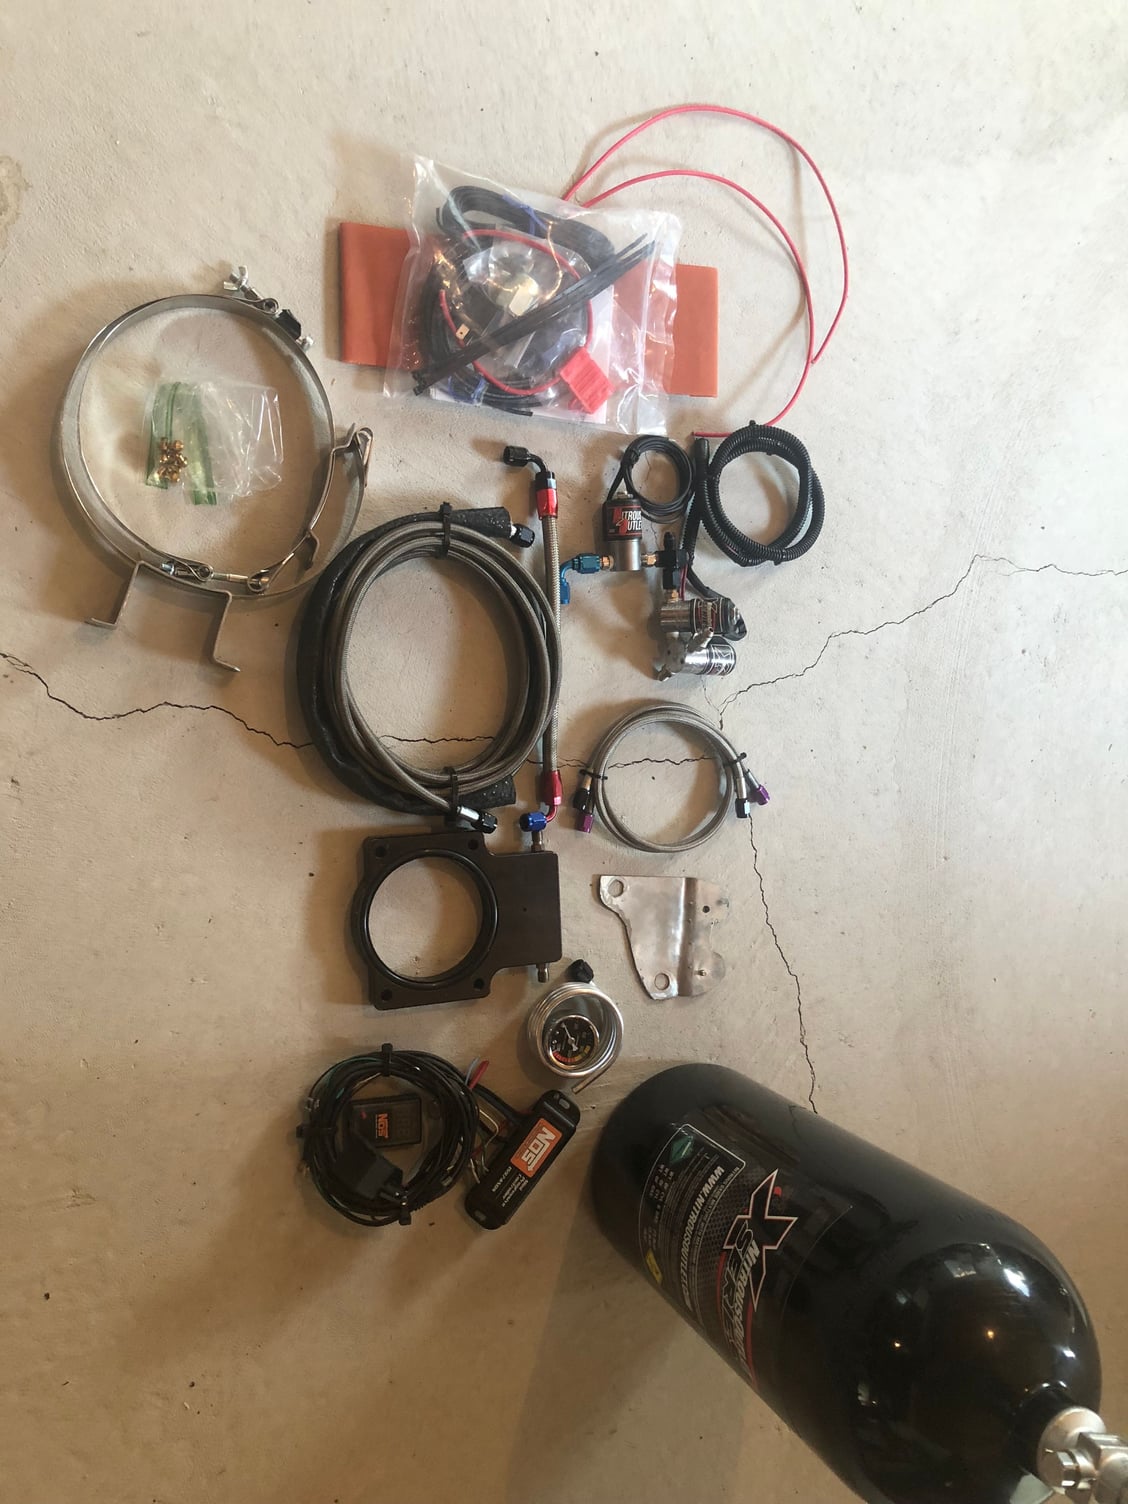  - Wet Nitrous Setup, LS3 Coils, and S10 Headers - Colorado Springs, CO 80925, United States